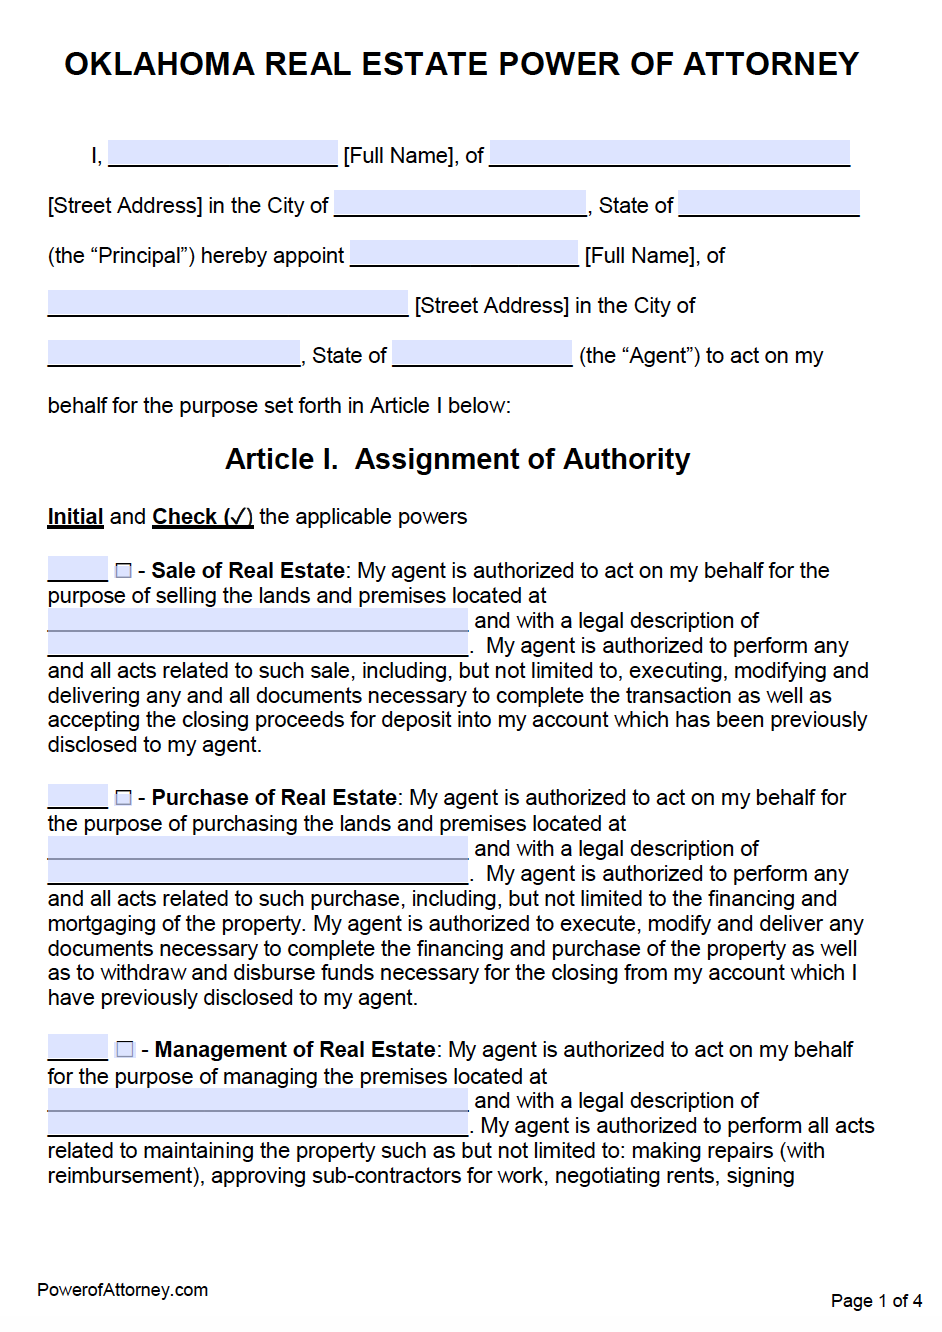 Free Real Estate Power of Attorney Oklahoma Form - PDF - Word